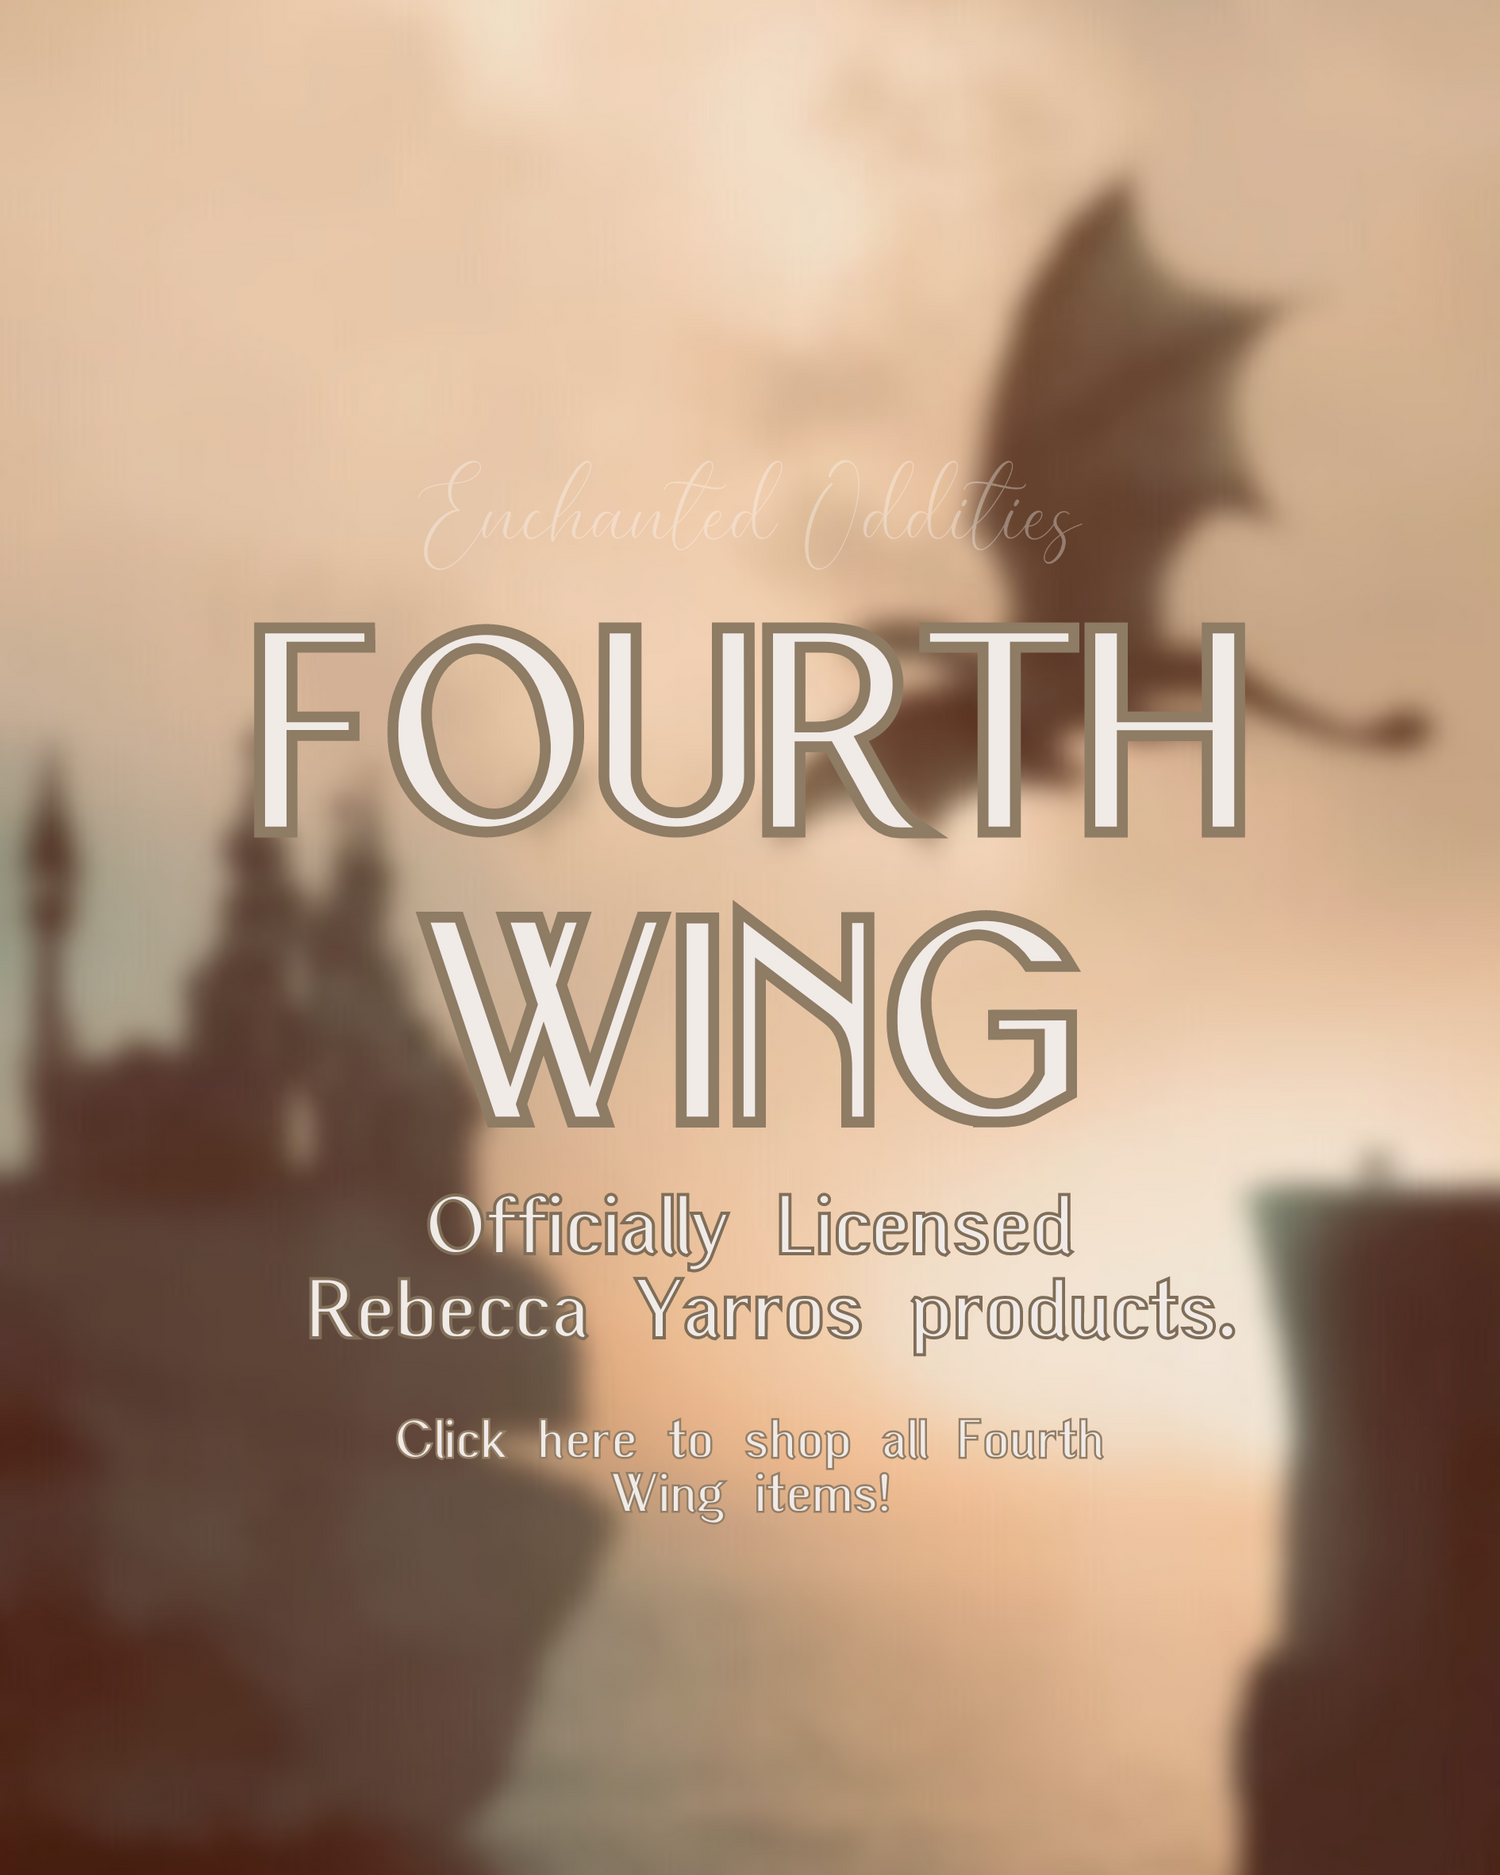 ✧ FOURTH WING ✧